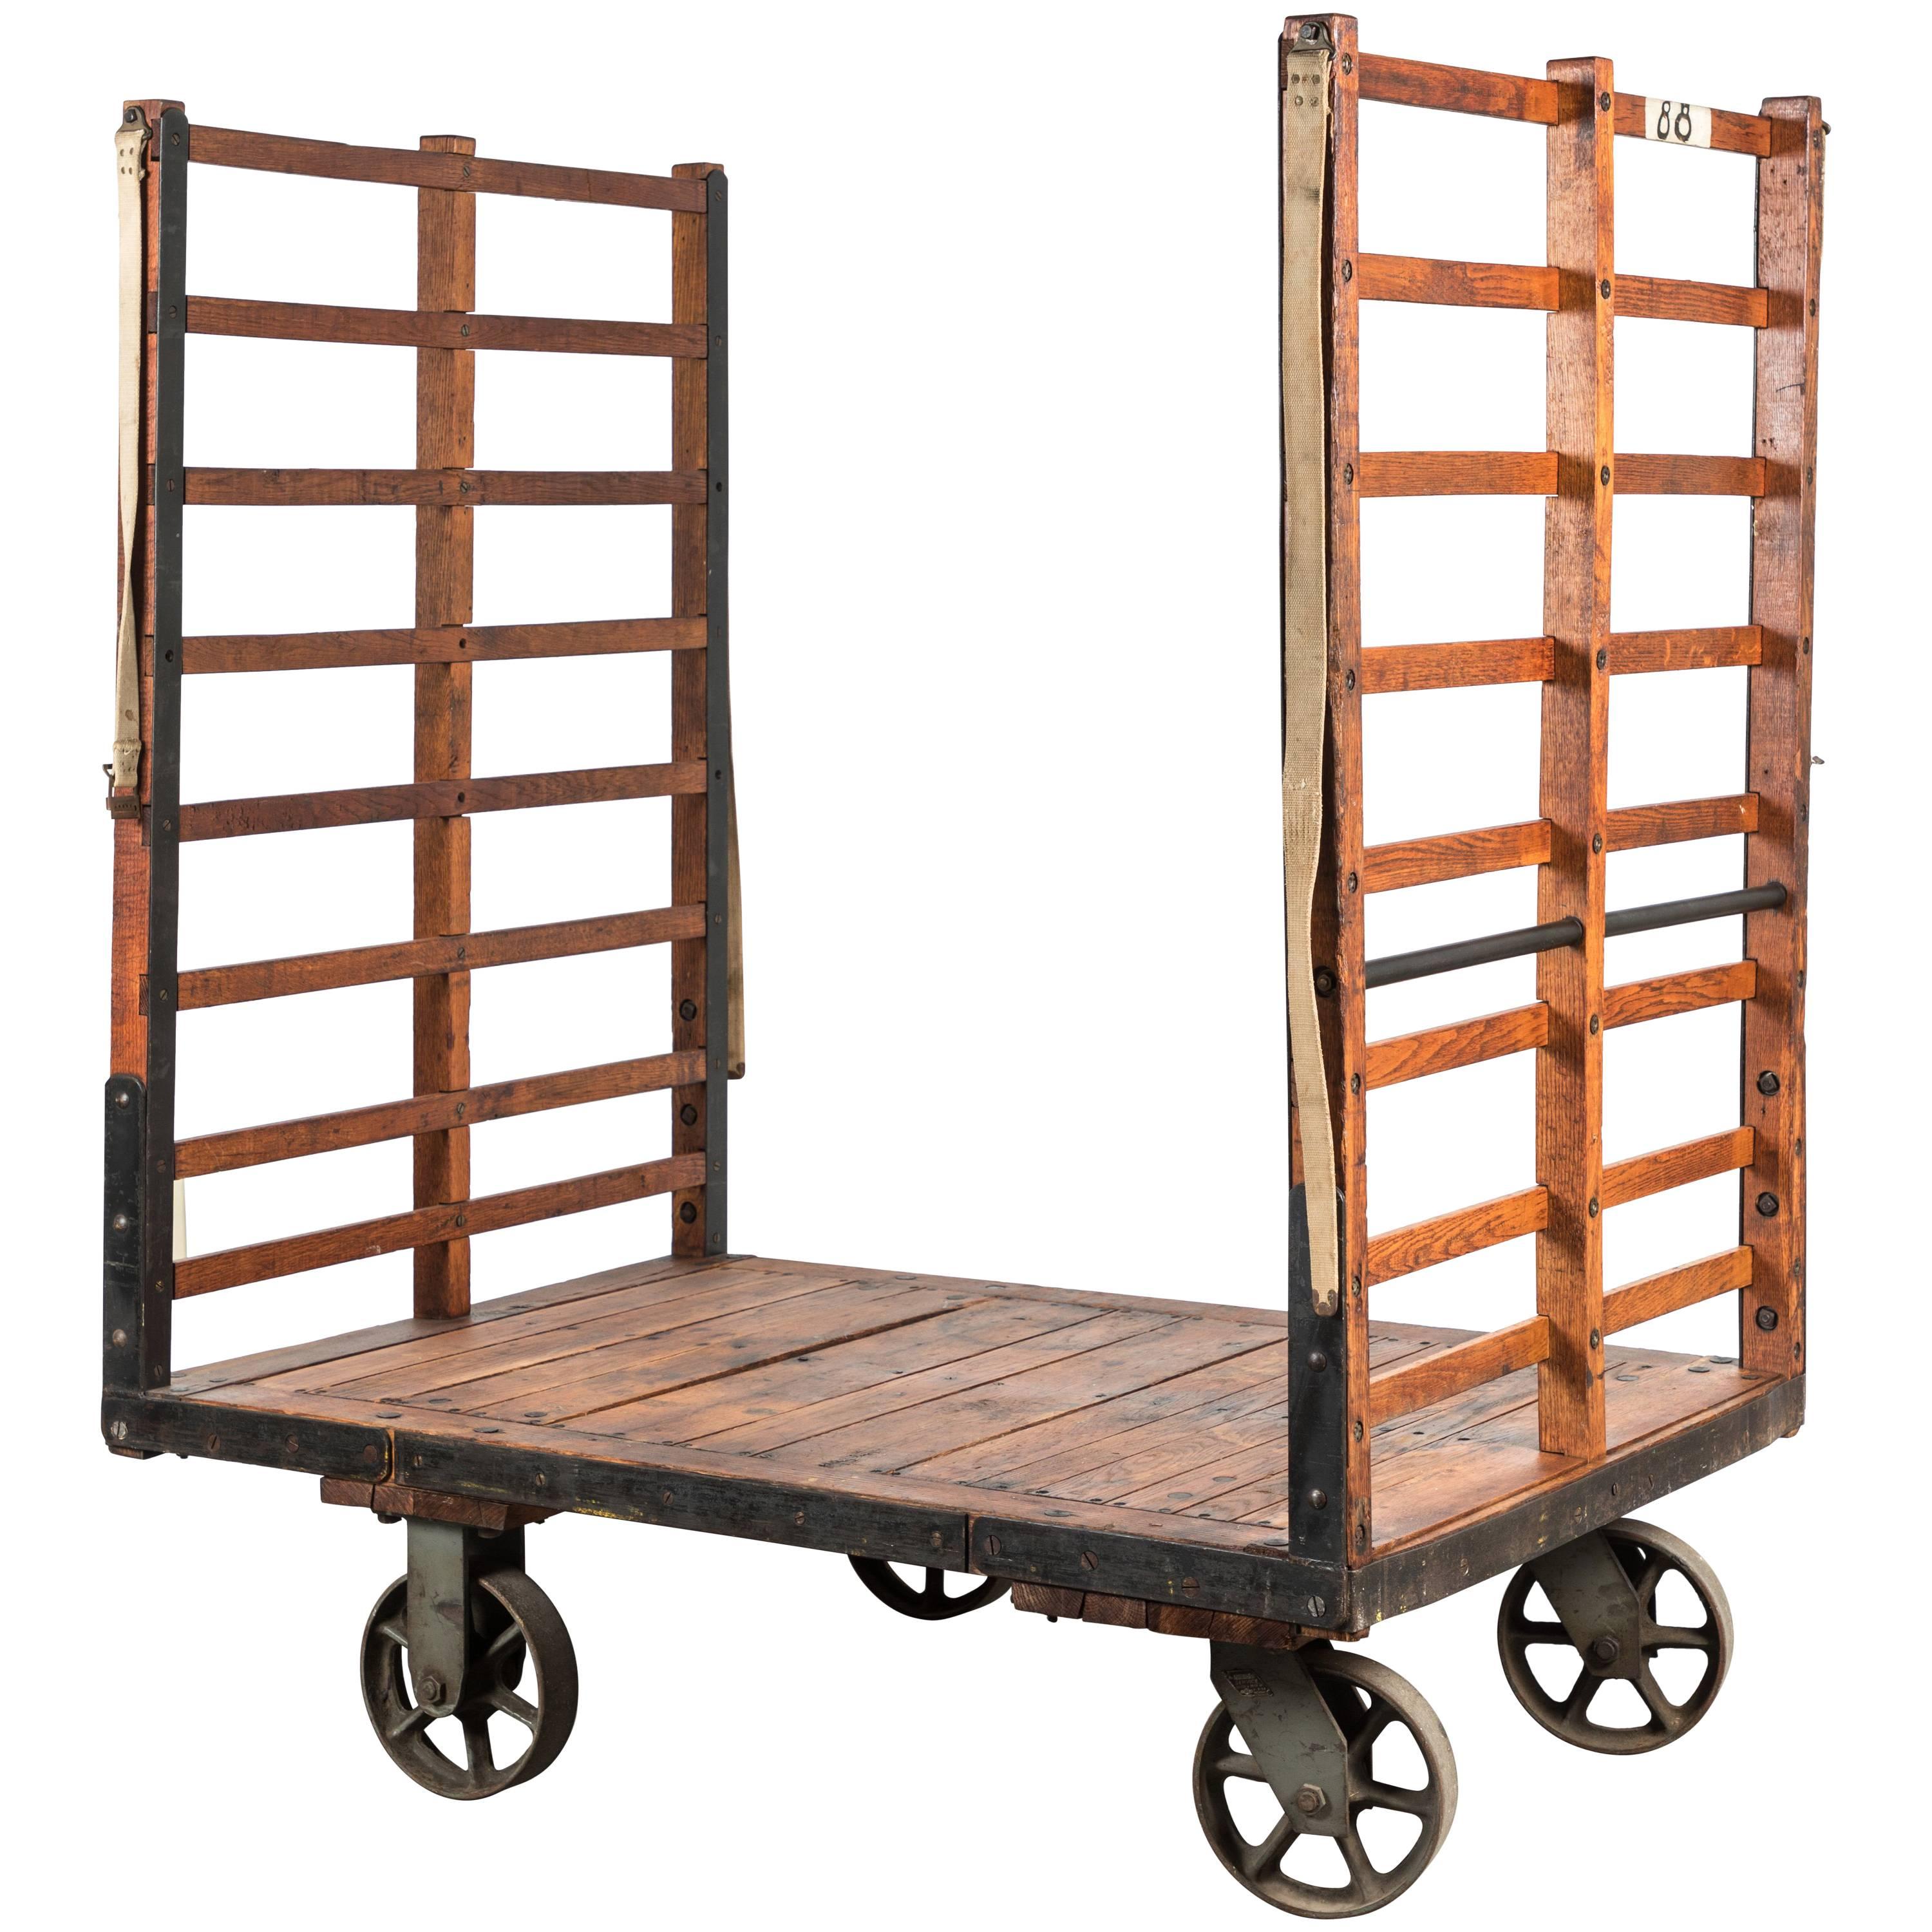 Late 19th Century Midwestern Train Depot Luggage Cart